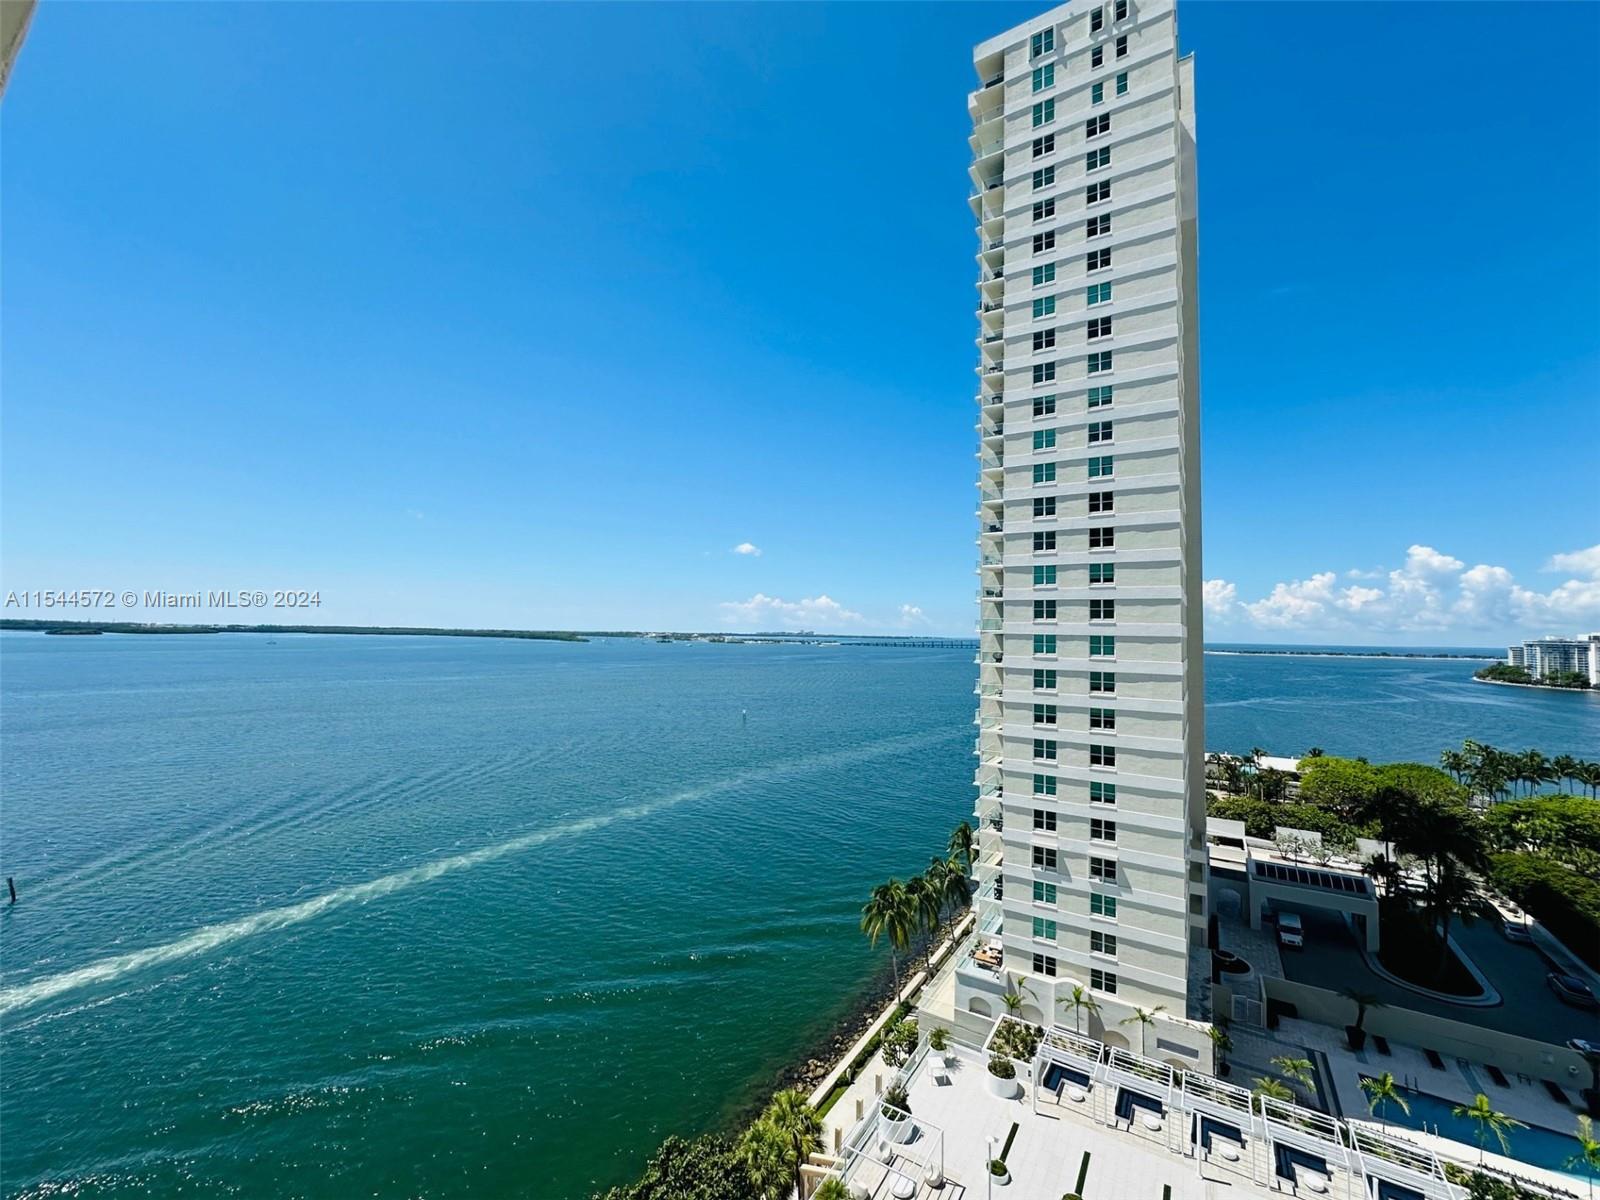 AMAZING UNIT AT ISOLA BRICKELL KEY! GORGEOUS VIEWS OF THE BAY AND OCEAN FROM THIS CORNER UNIT, 2 BEDROOMS AND 2 BATHROOMS, SPLIT PLAN UNIT. NICELY UPDATED WITH GORGEOUS TILE FLOOR, KITCHEN WITH THE OPEN SPACE TO THE LIVING AREA. VERY BRIGHT BEDROOMS WITH OCEAN VIEW FROM EACH BEDROOM. UNIT COMES WITH ONE CAR GARAGE ASSIGNED. BRAND NEW BEAUTIFUL OLYMPIC POOL AND PICKLEBALL / TENNIS COURT TO BE OPEN JULY 19, 2024. A NEW GYM WITH GORGEOUS OCEAN VIEWS, SECURE CONCIERGE WITH A BRIGHT SPACIOUS LOBBY. WALKING DISTANCE TO RESTAURANTS AND BRICKELL LIFETIME! READY TO MOVE IN!